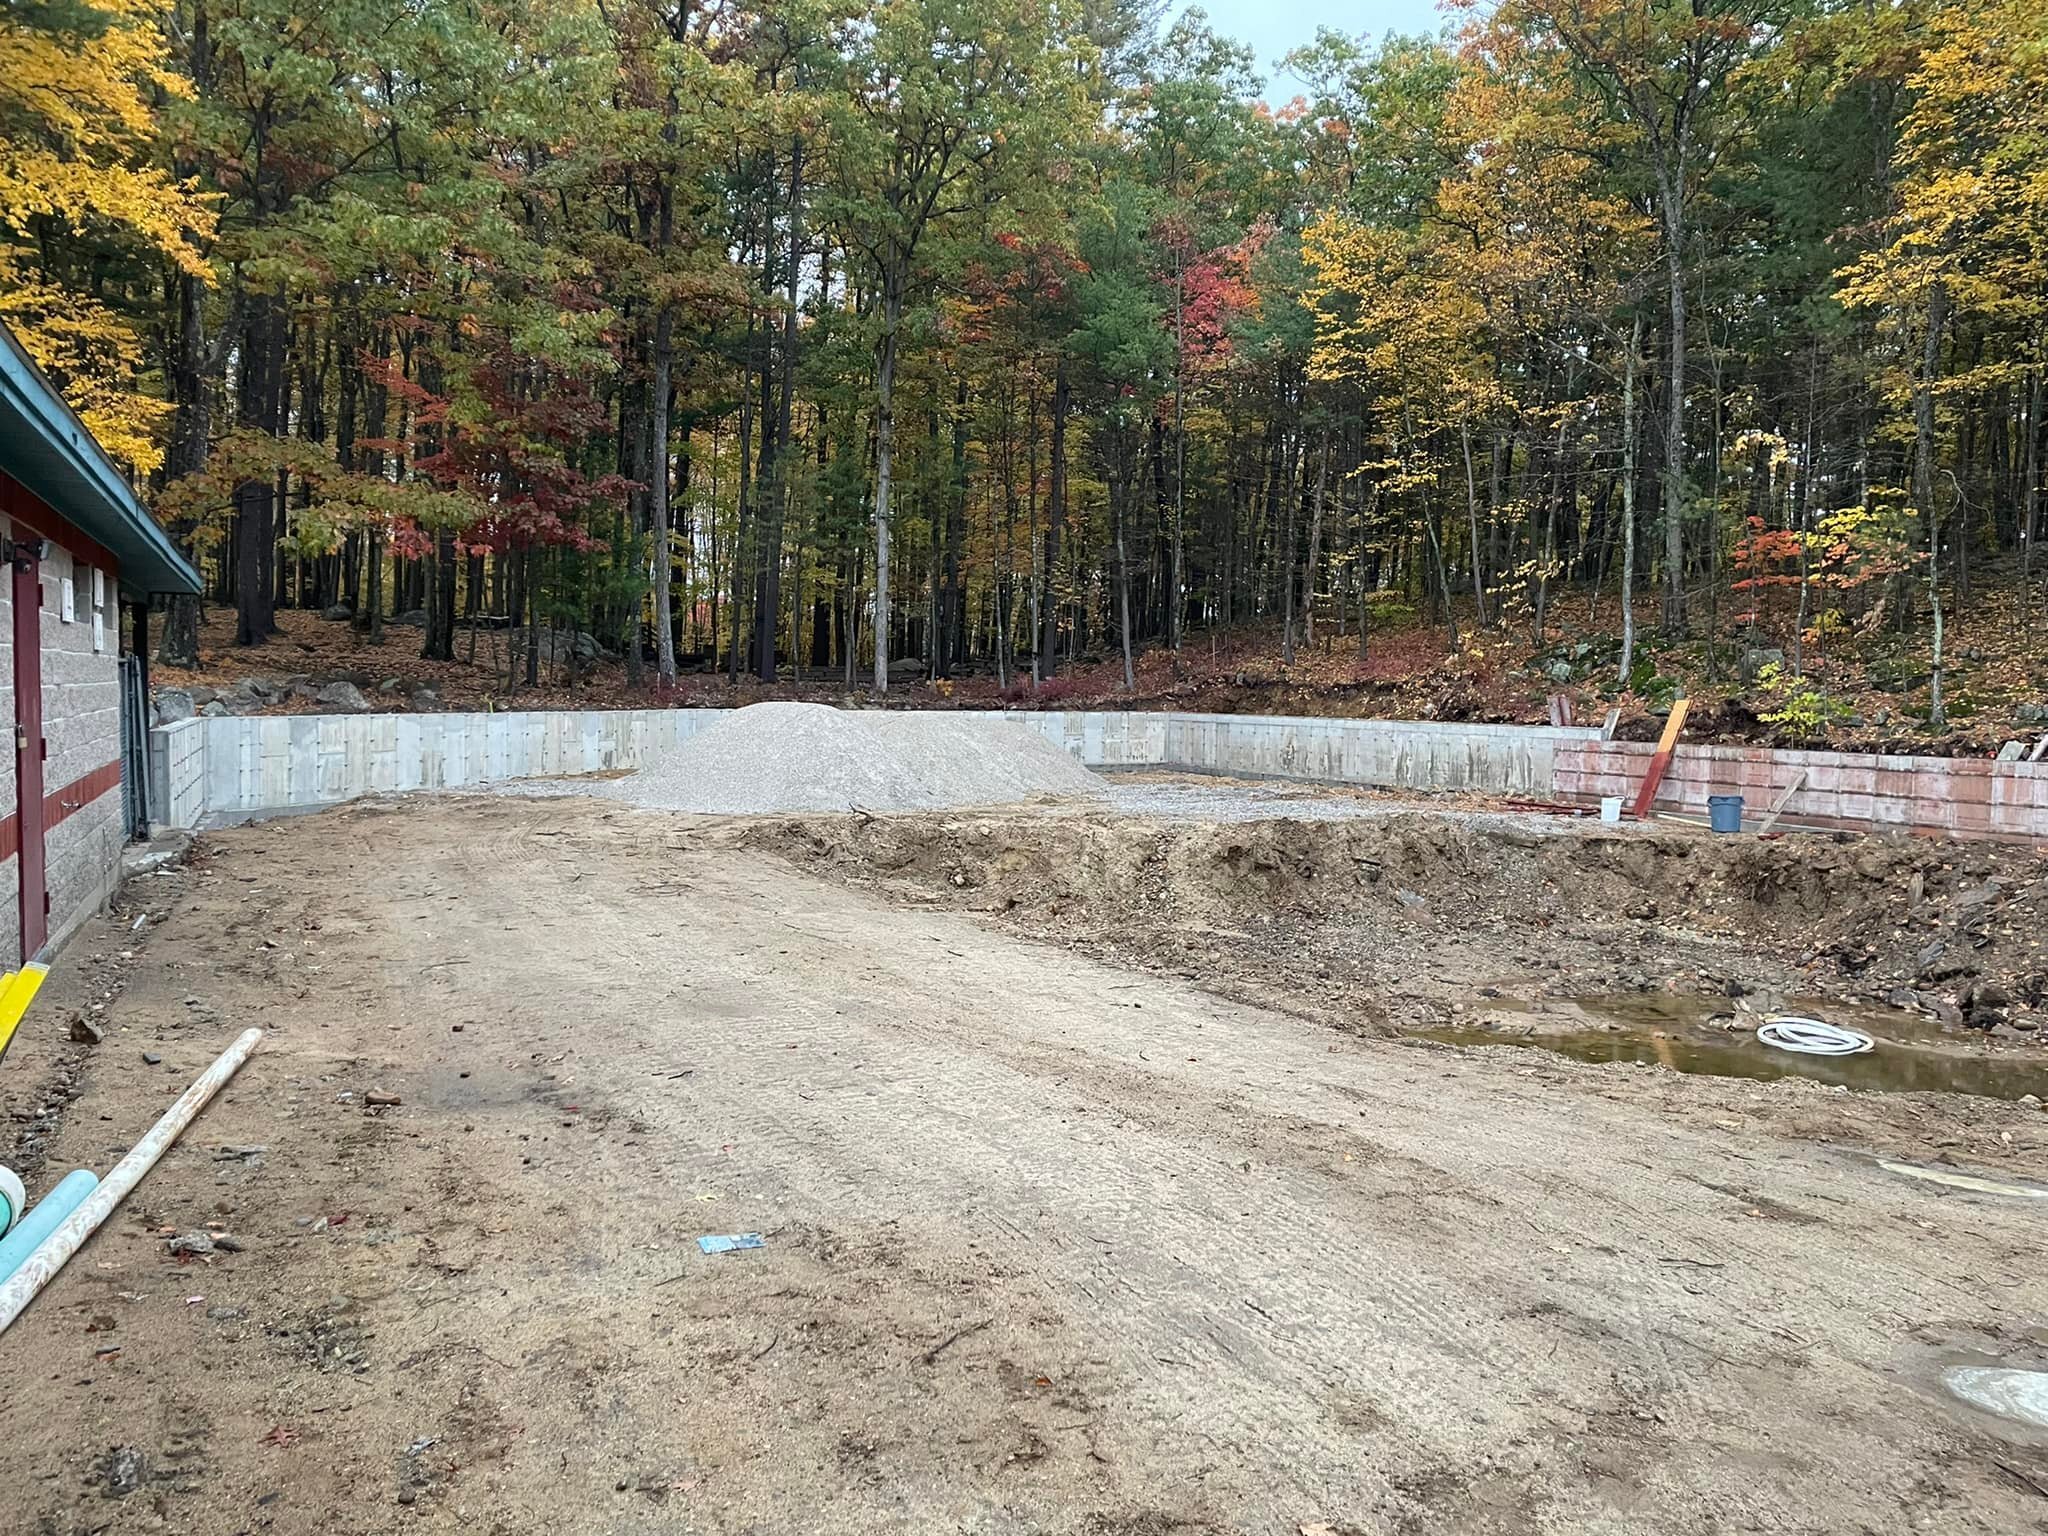 In the home stretch on this project .aprox 400&rsquo;
Retaining walls and a pool house with 11&rsquo; walls
3 openings, 12 beam pockets and 27 different sized sleeves. Shout out to the guys on this one especially Mitch for getting it done with all th